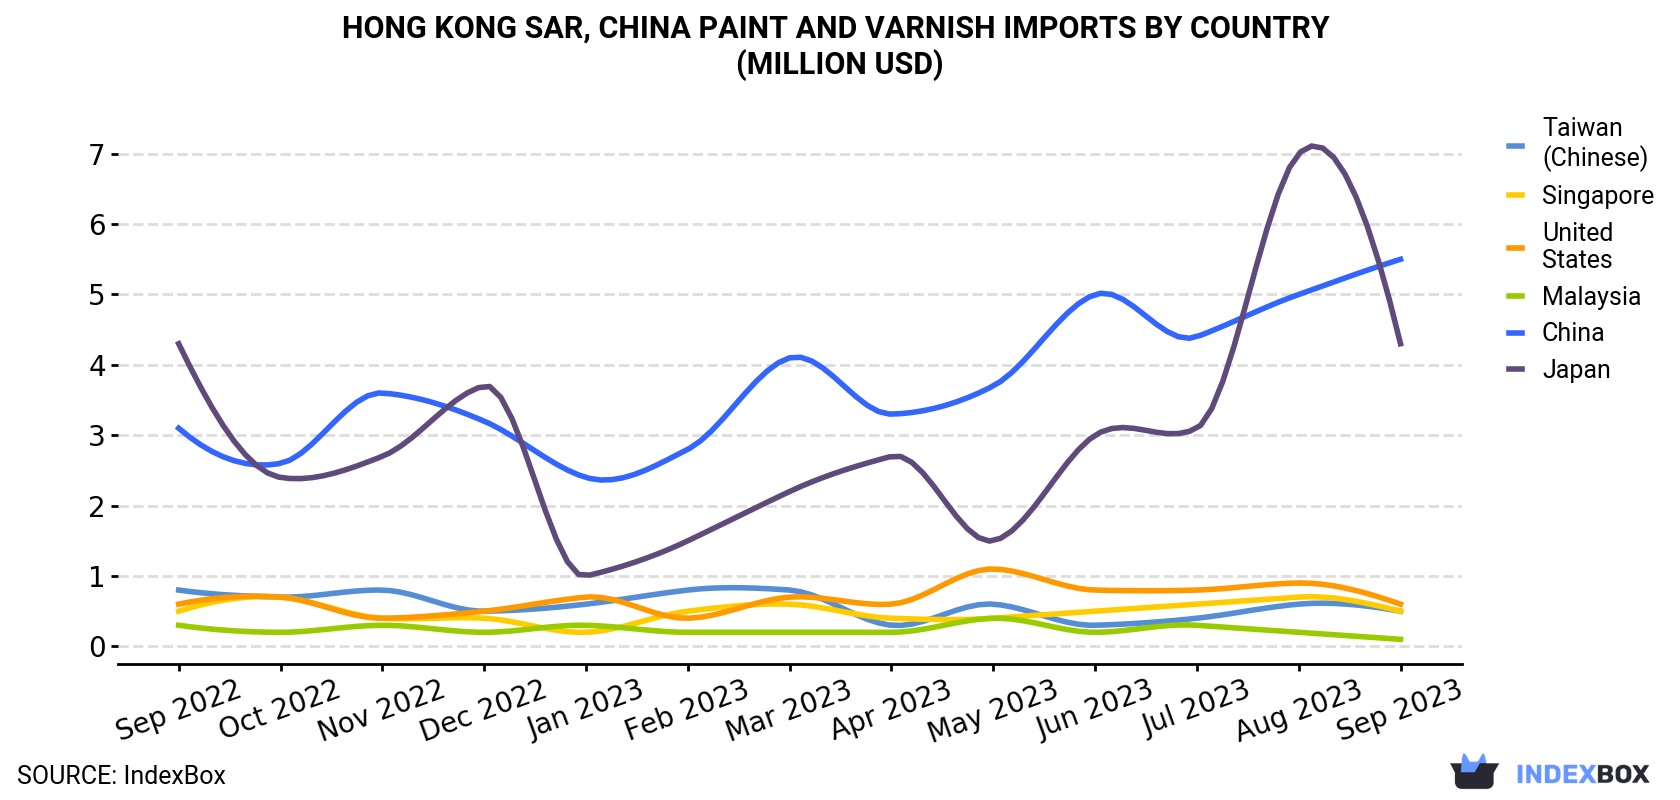 Hong Kong Paint and Varnish Imports By Country (Million USD)